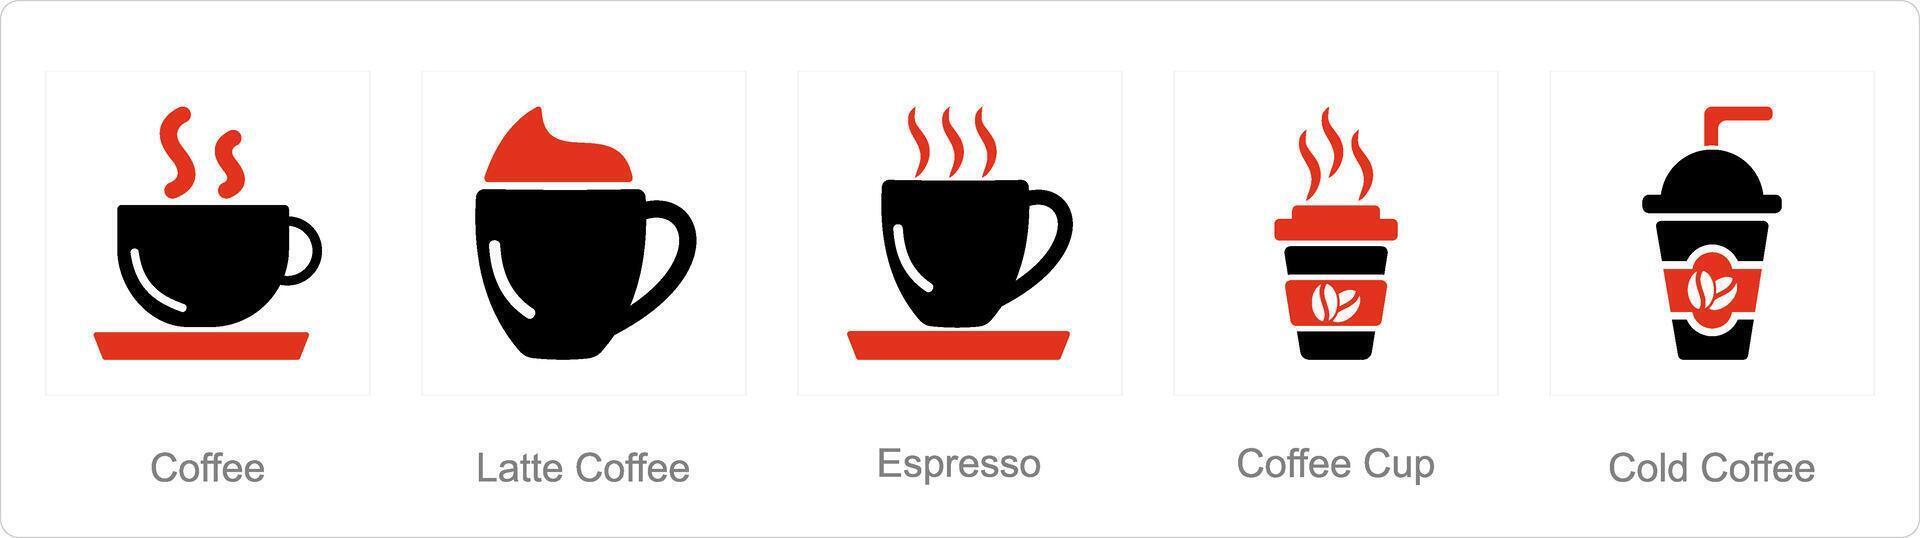 A set of 5 Coffee icons as coffee, latte coffee, espresso vector